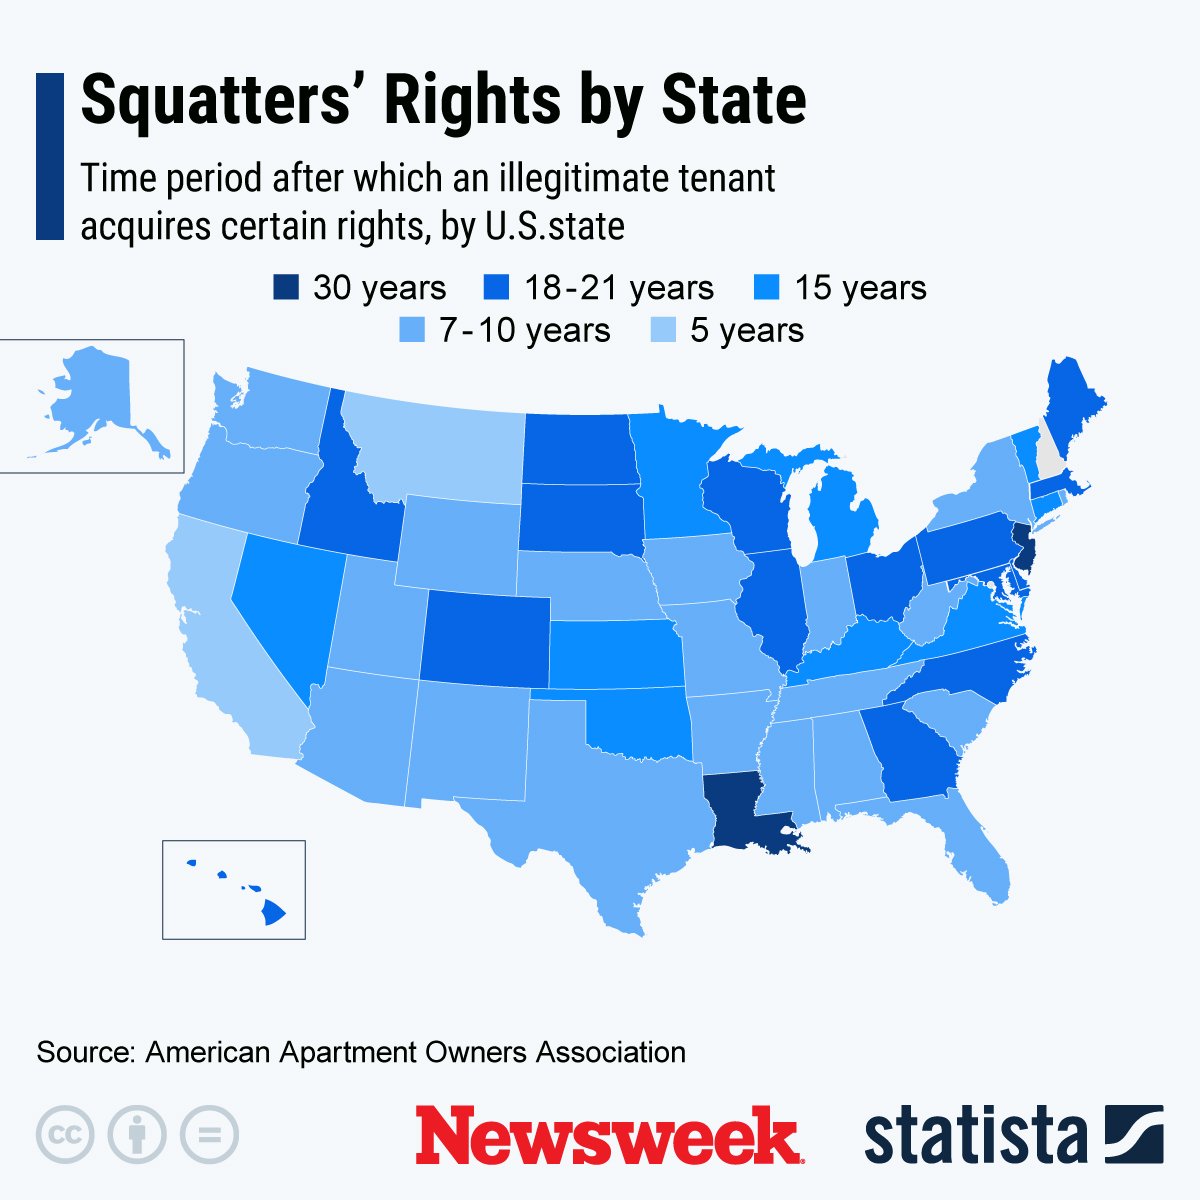 Squatters' Rights by State